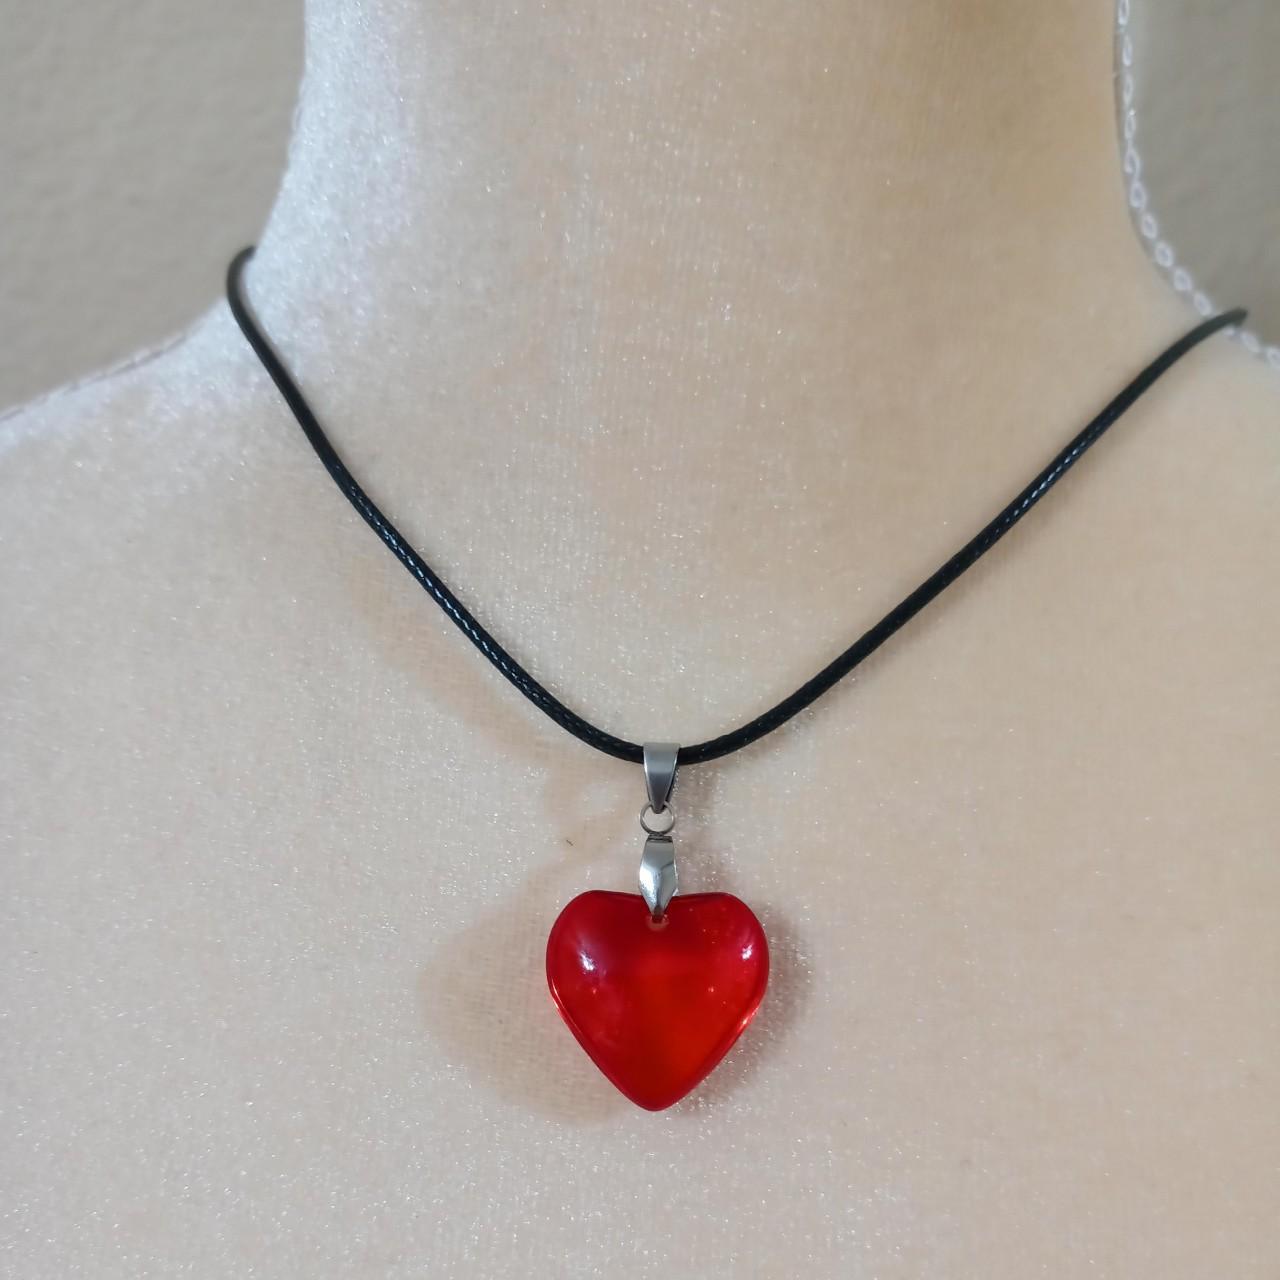 Small red glass heart necklace choker pendant with... - Depop